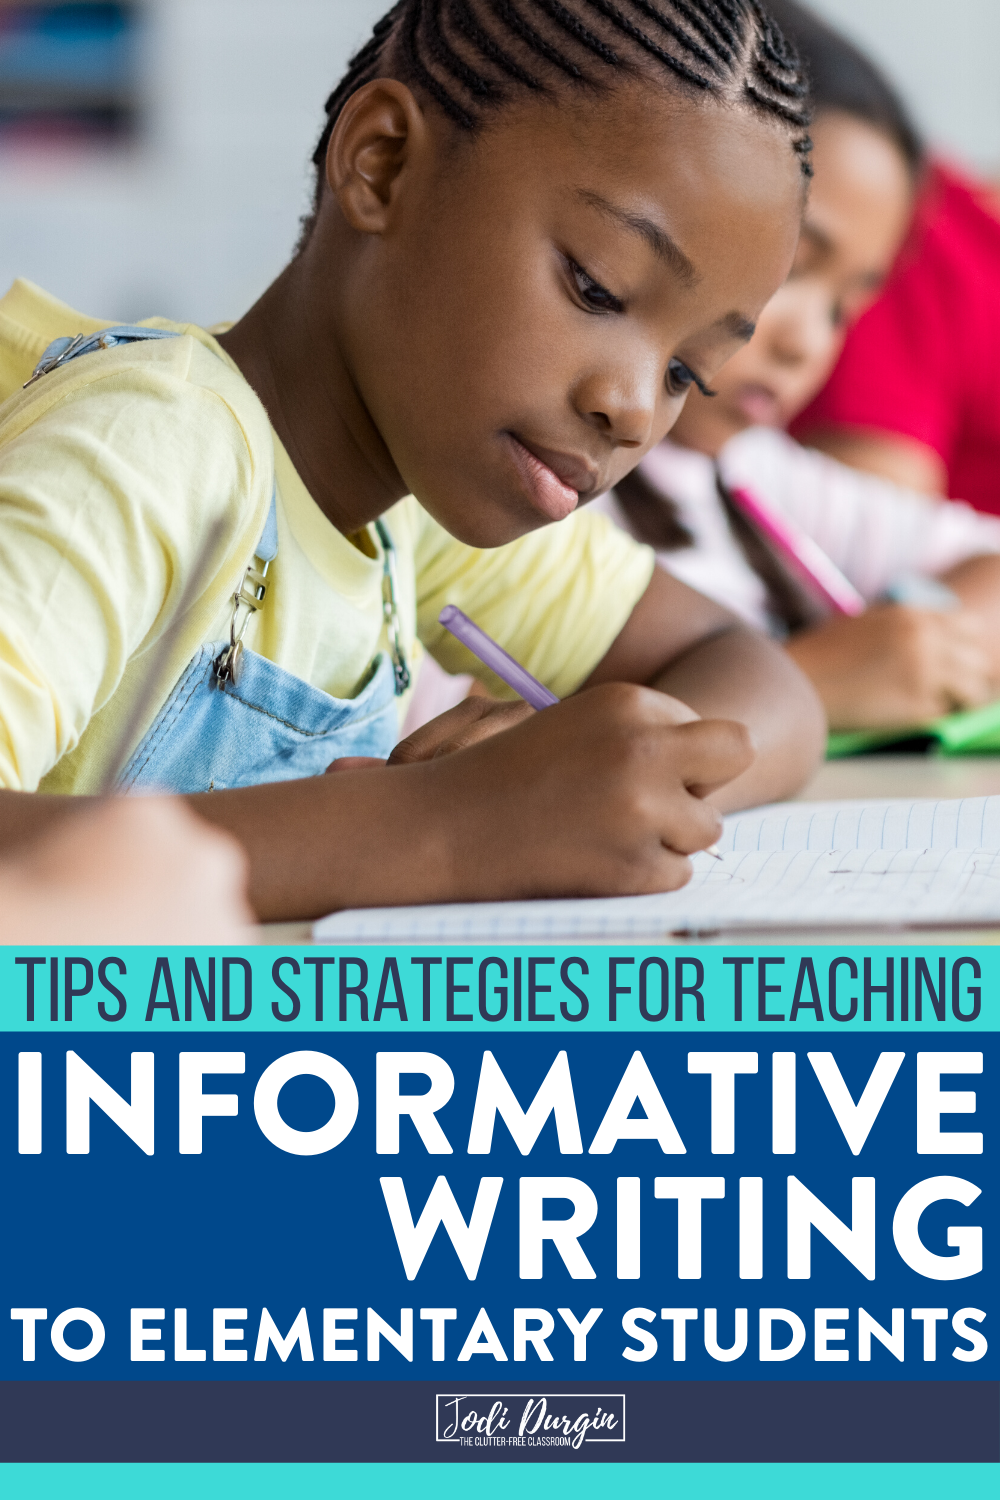 This Clutter-Free Classroom blog post suggests informative writing mini lesson ideas for 1st grade teachers to use when teaching a unit on informational writing. These elementary lessons are developmentally appropriate for first grade students and cover topics like writing an introduction, brainstorming ideas, transition words, writing conclusions, and using mentor texts. Read the post to learn more! #informativewriting #informationalwriting #explanatorywriting #elementarywritinglessons #firstgradeteacher #firstgradewriting